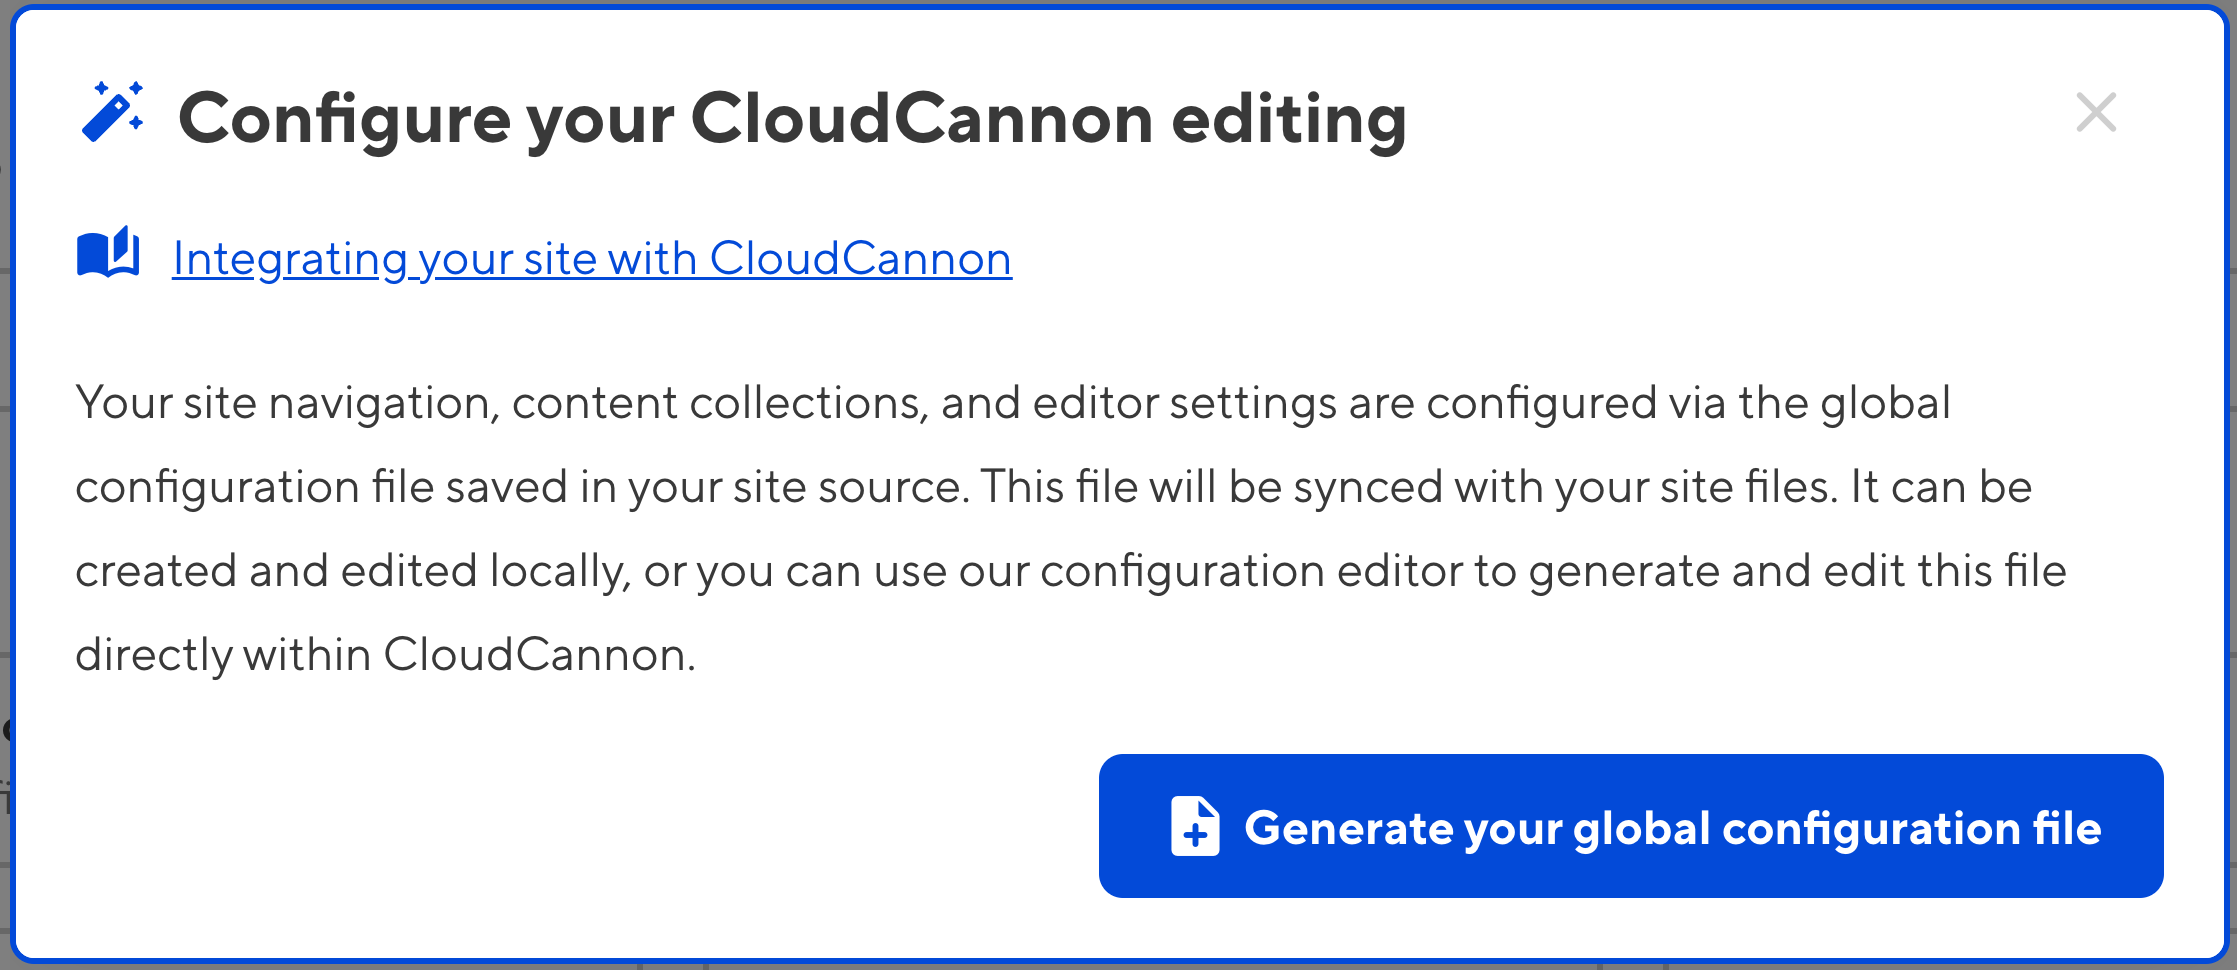 The CloudCannon app pop-up explains how a configuration file is used and shows a button to Generate your global configuration file.